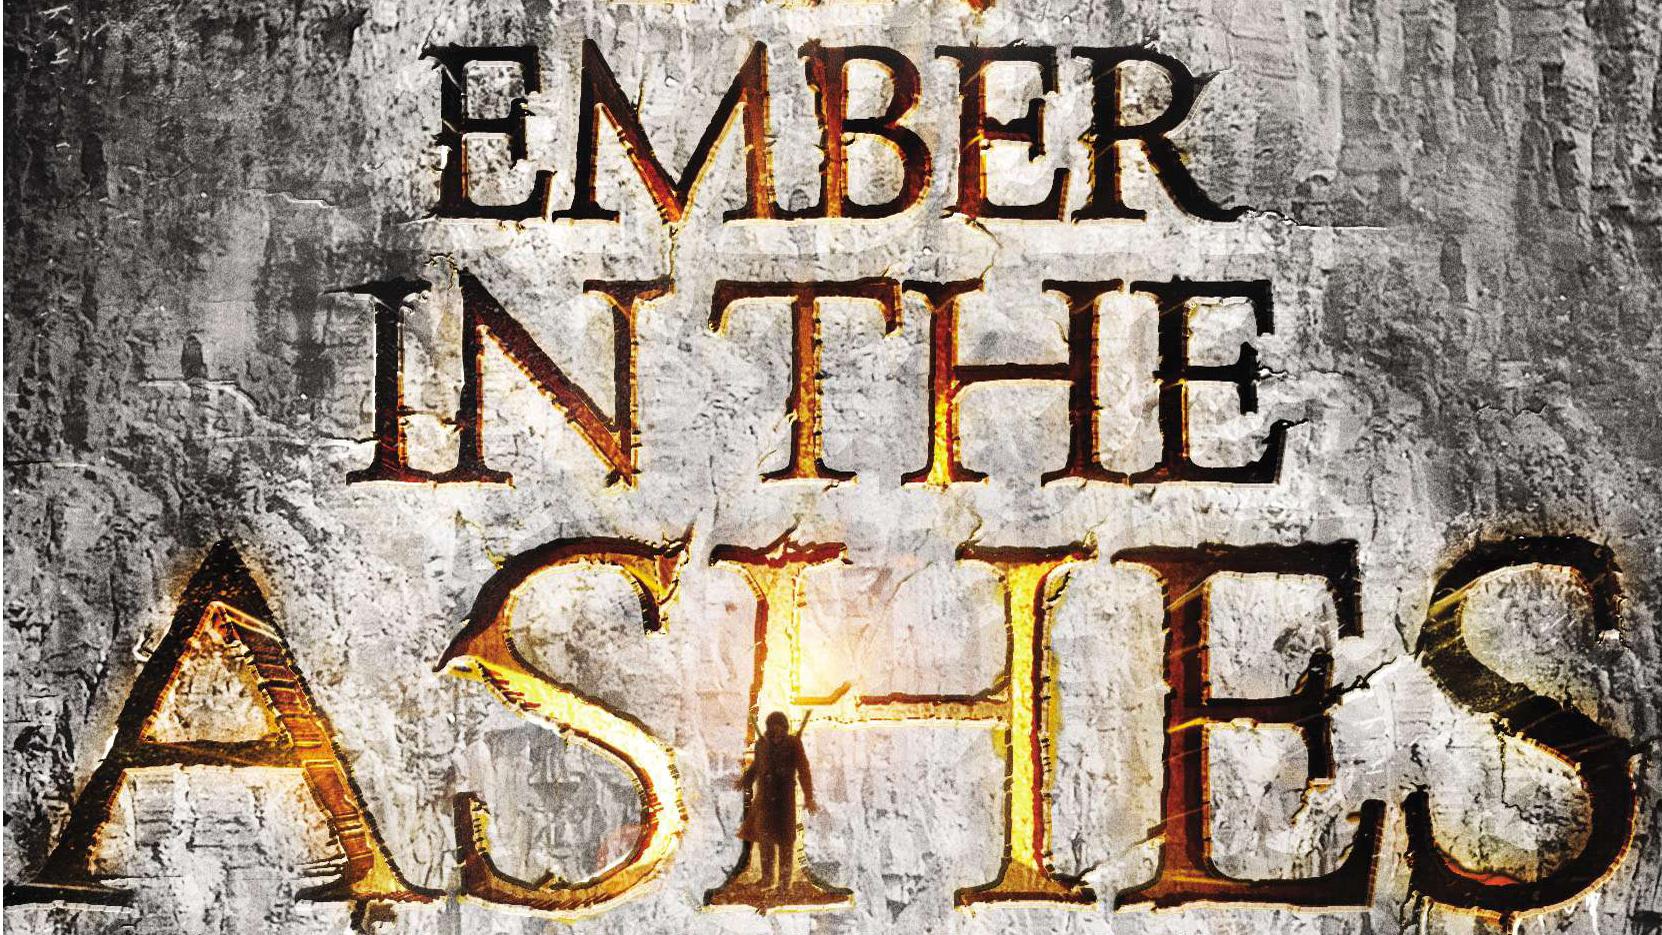 Author Sabaa Tahir's first novel "An Ember In The Ashes" give fantasy readers a real look at the all to brutal realities of war. 